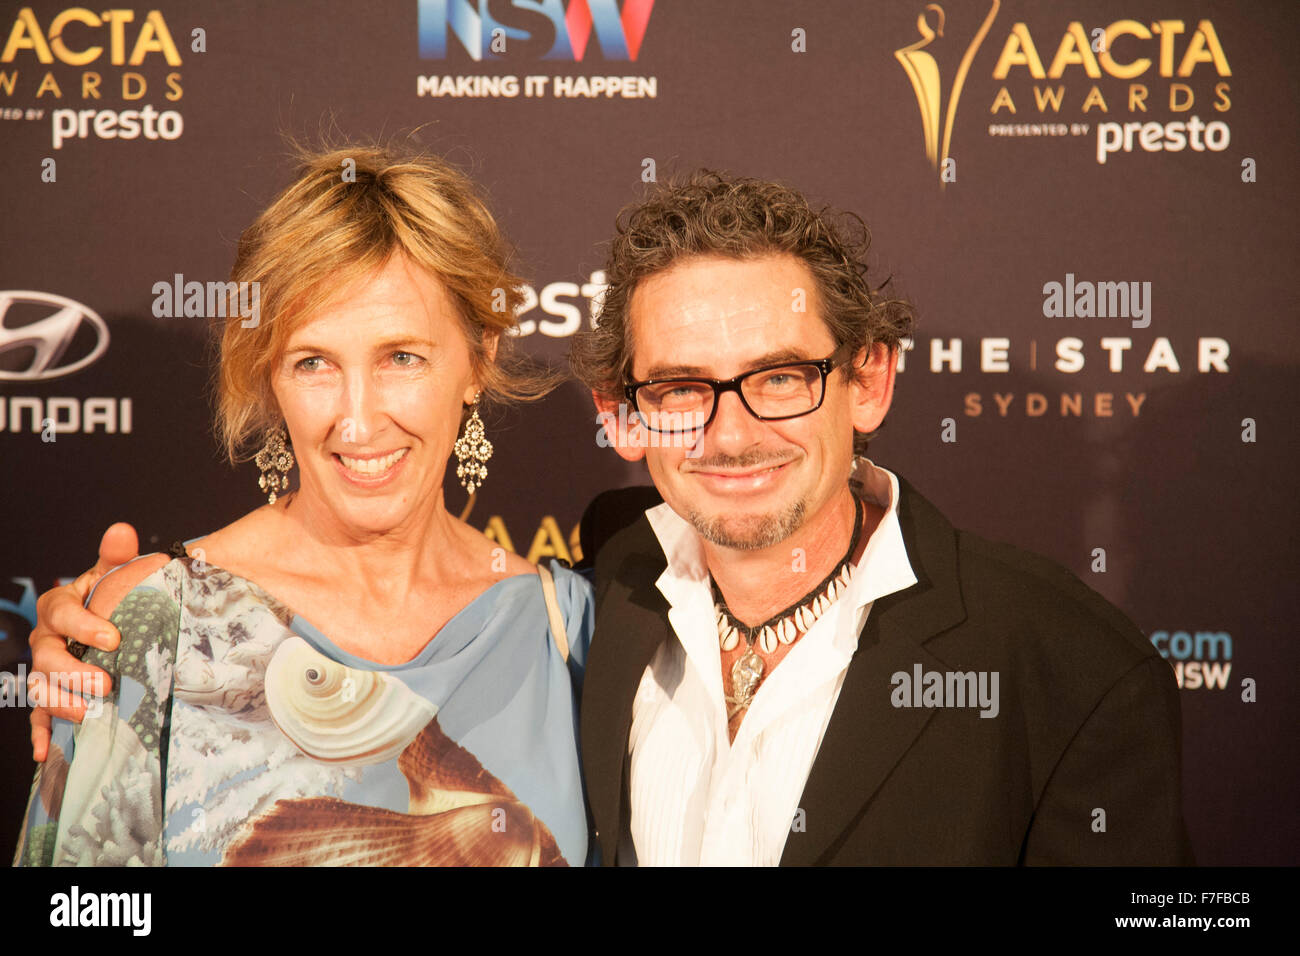 Sydney, Australia. 30th Nov, 2015. David White and Erica Silbersher on the red carpet before the 5th AACTA Industry Awards Dinner in Sydney. Credit:  model10/Alamy Live News Stock Photo